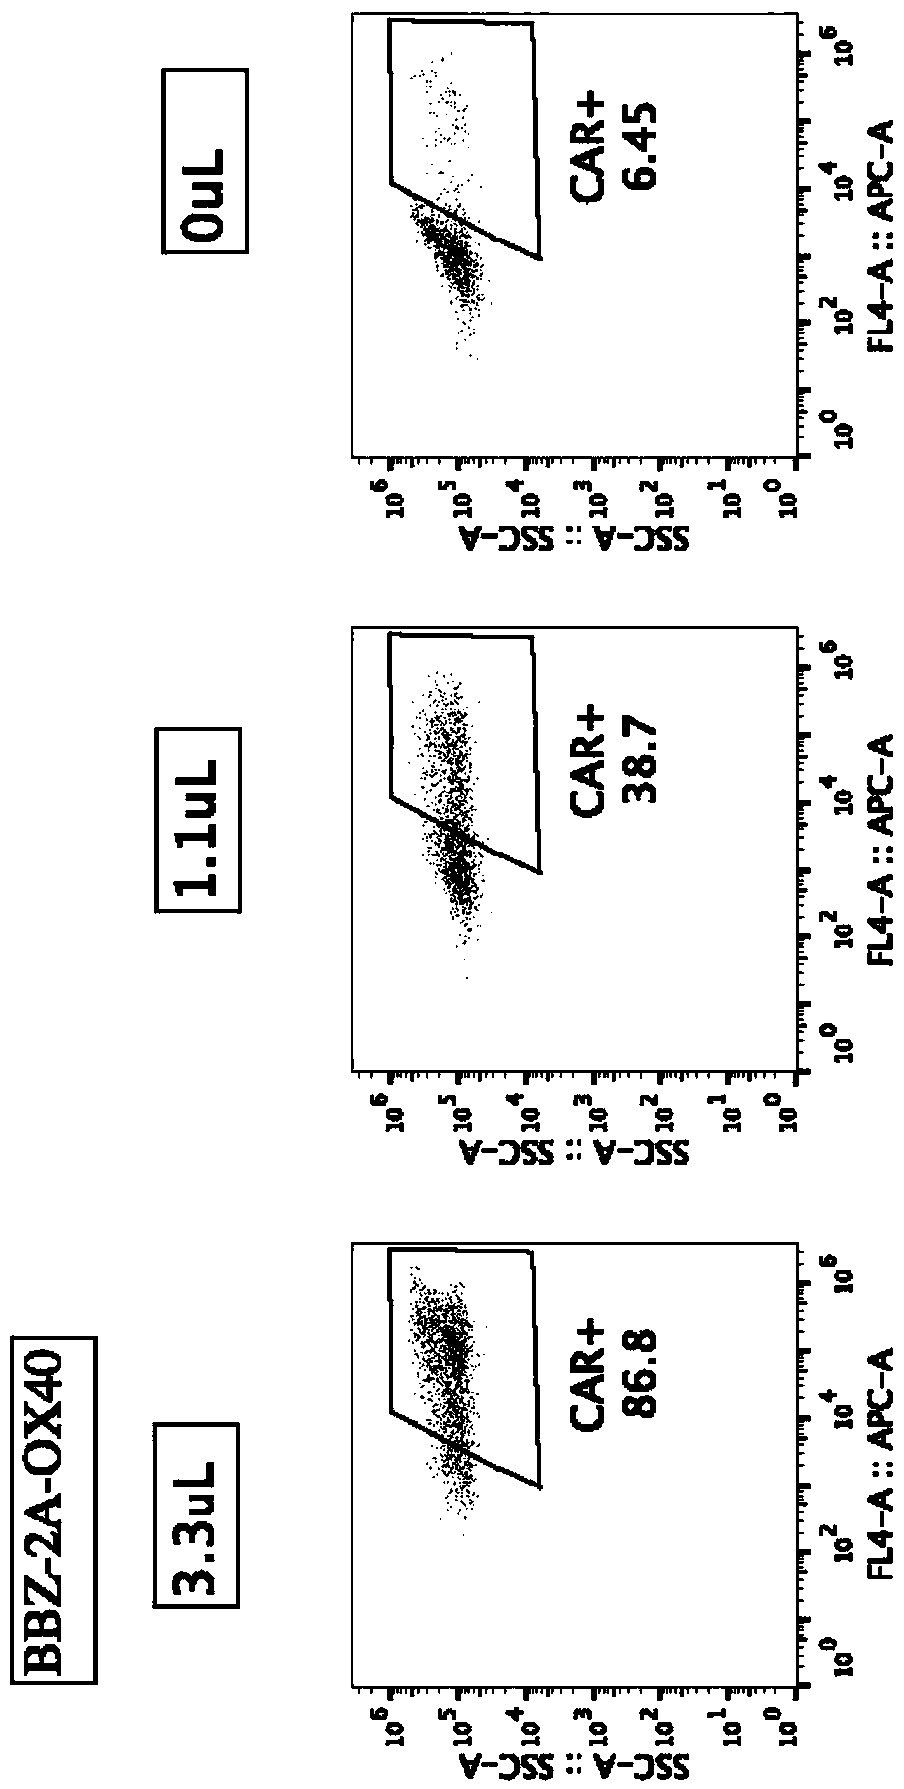 Chimeric antigen receptor comprising costimulatory receptor and application thereof